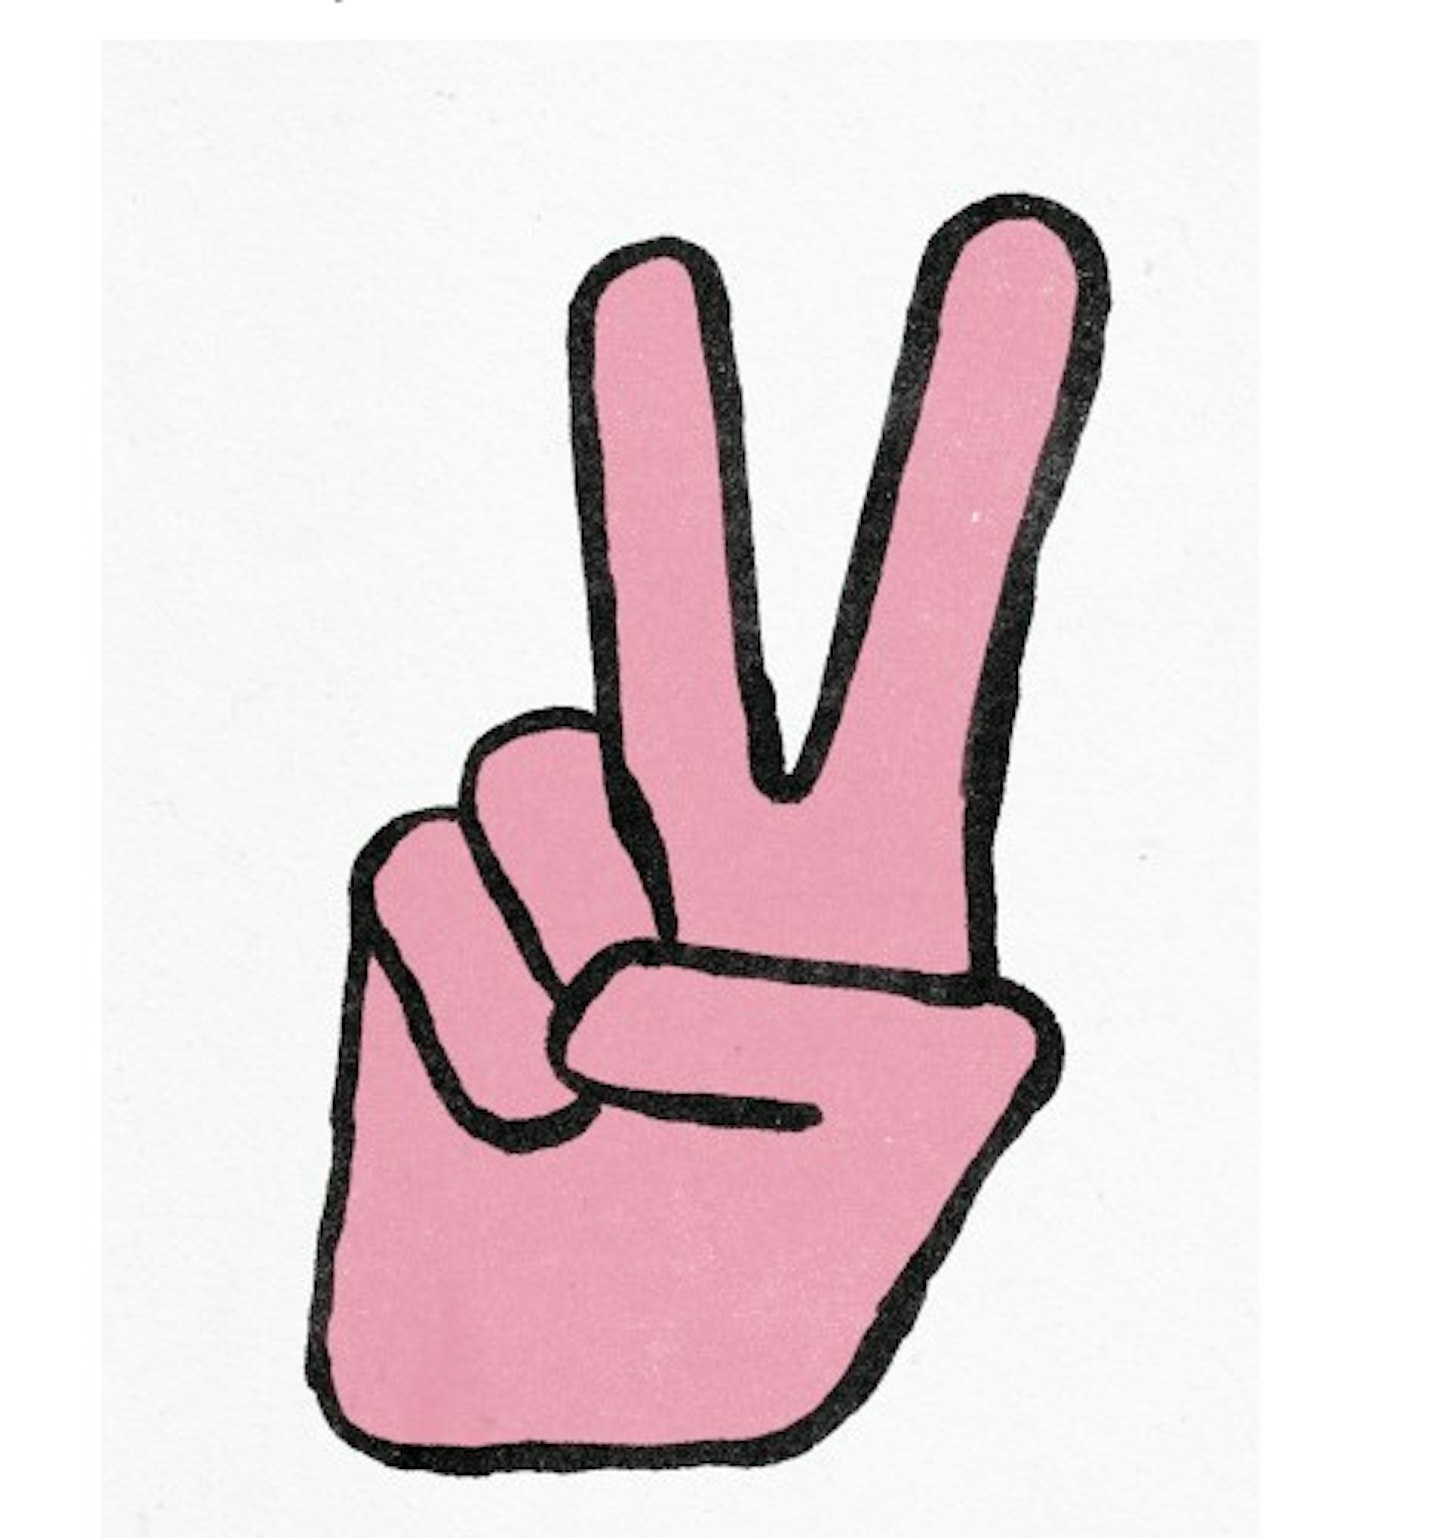 Peace 30 x 40cm Print by Marcus Waters, 25